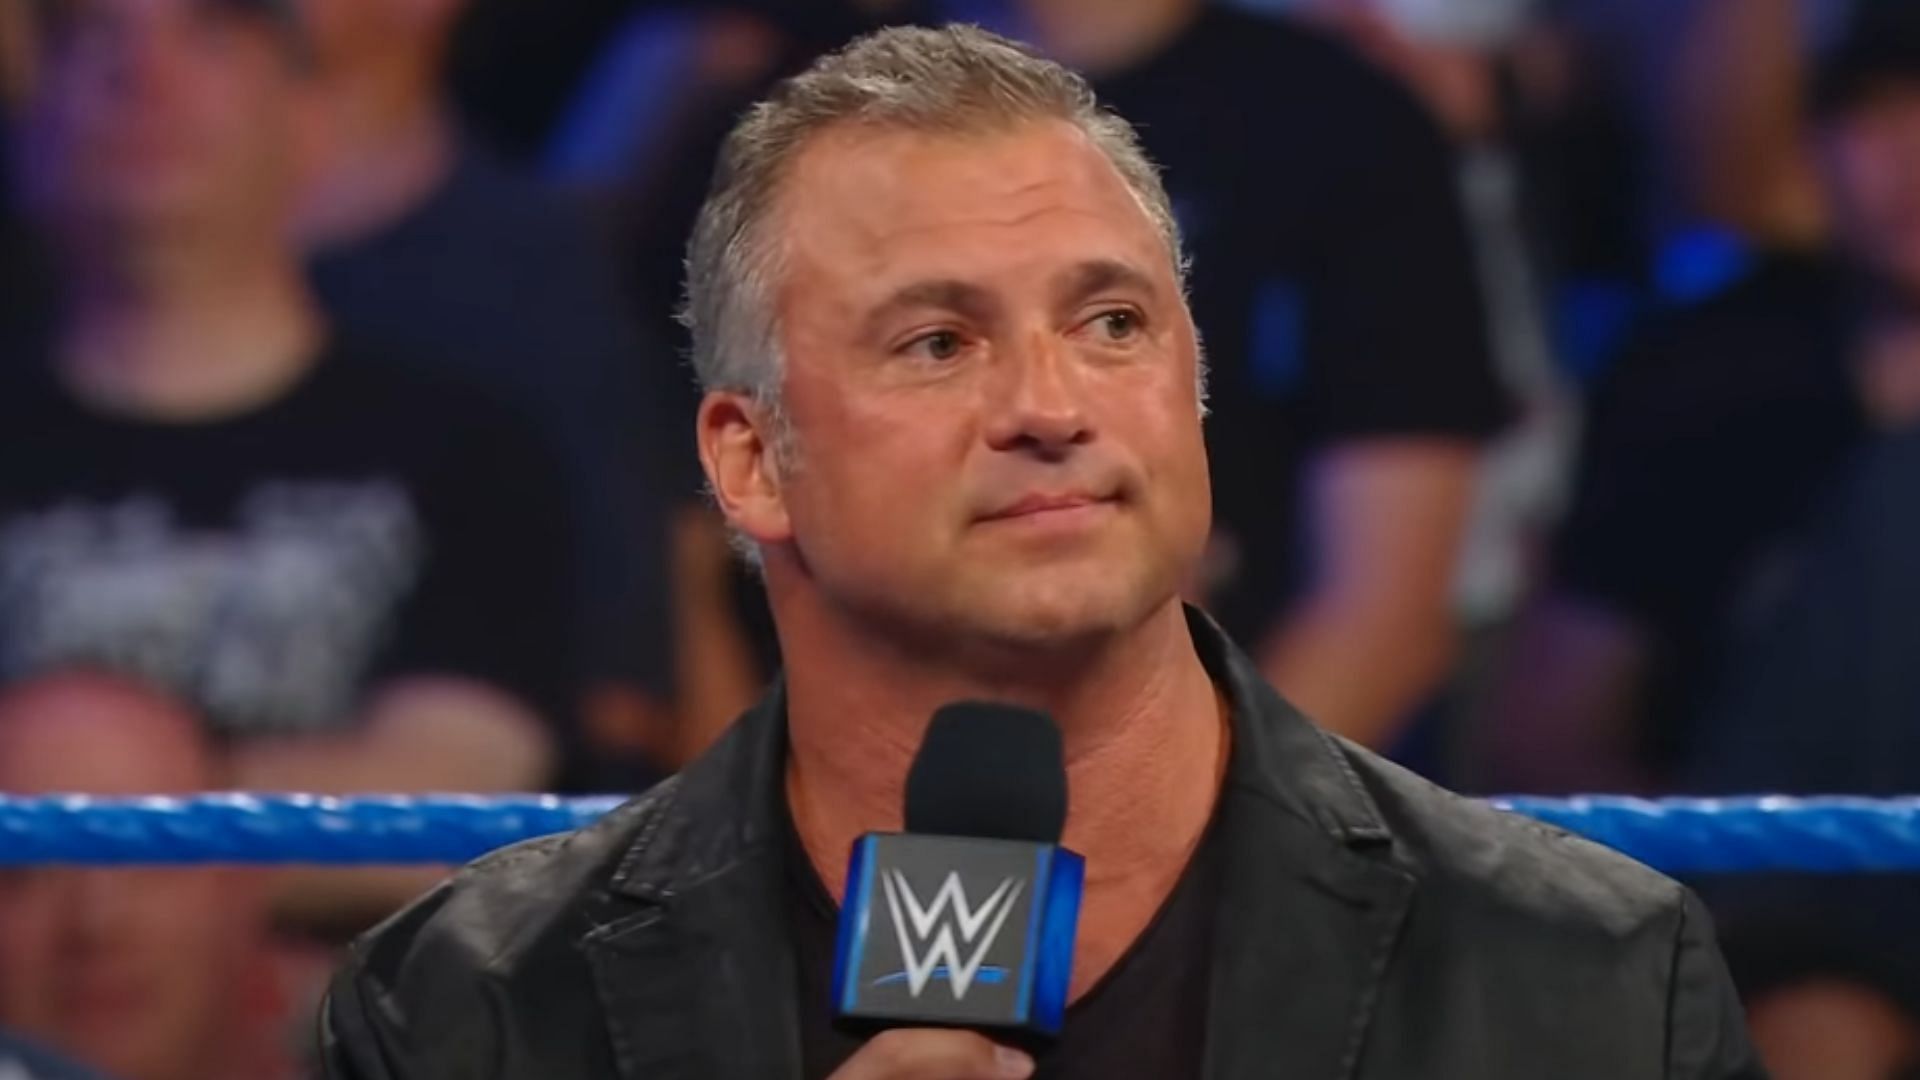 Shane McMahon recorded a big win in 2019.